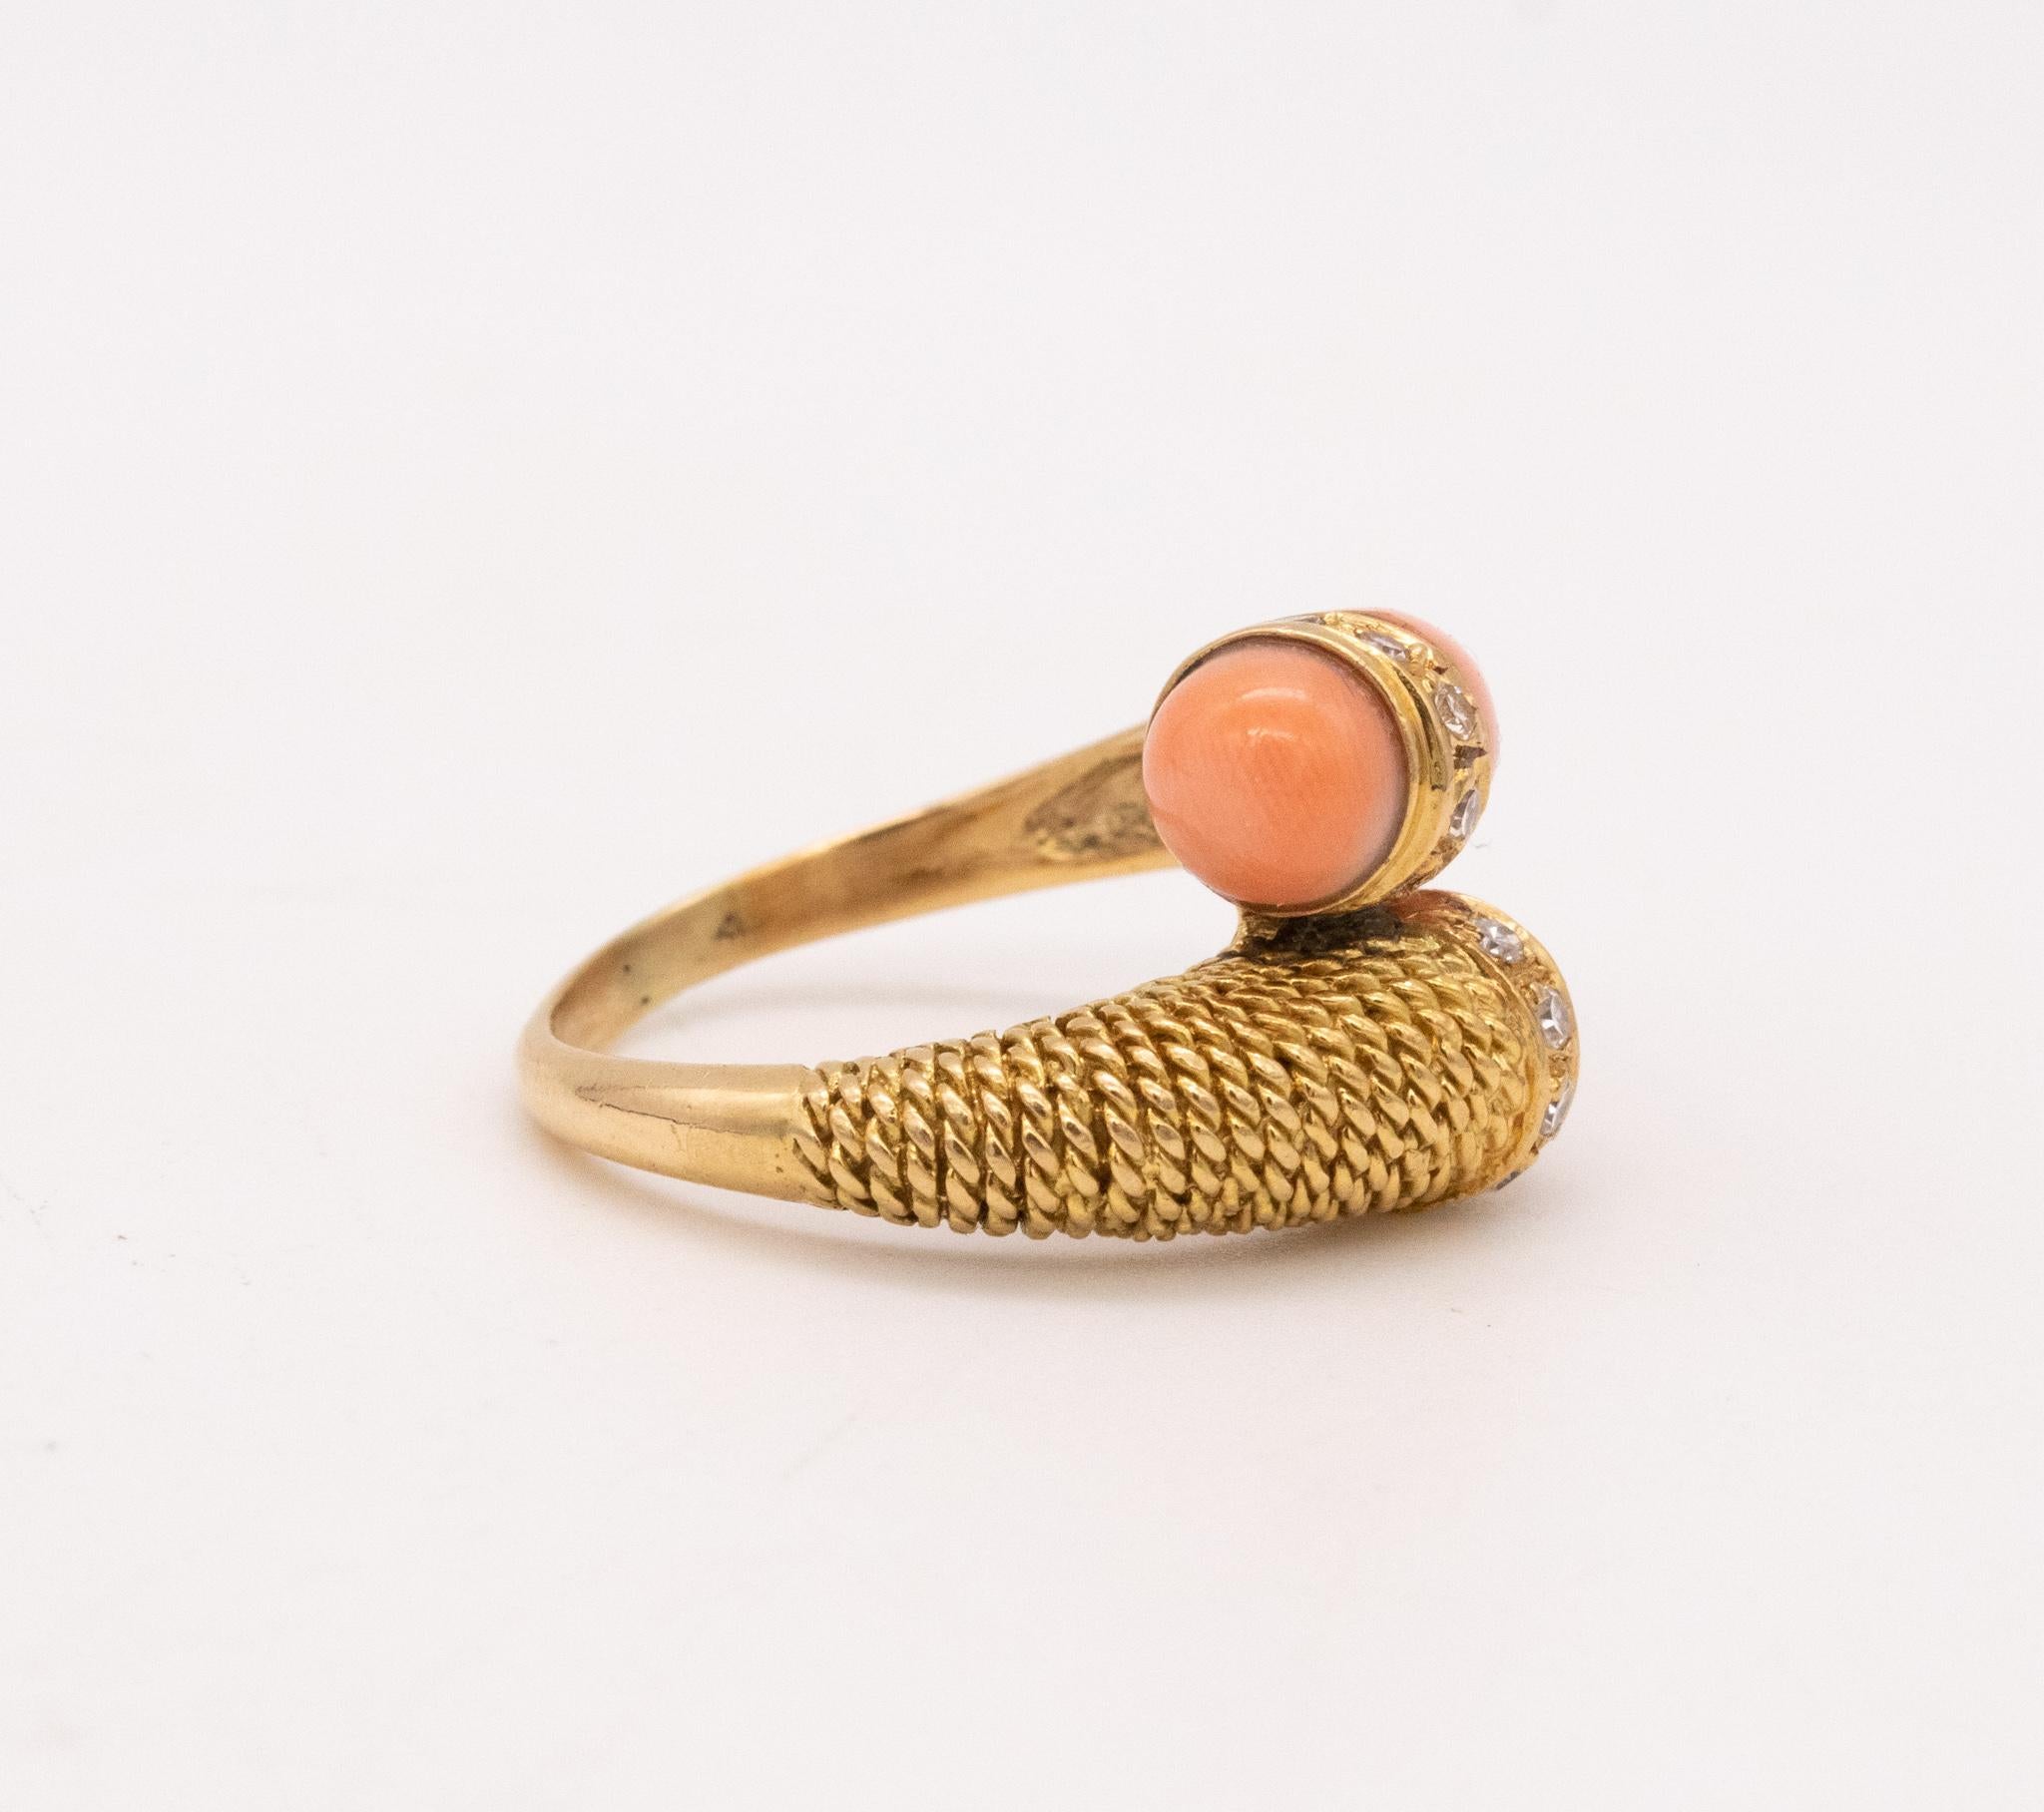 Mauboussin 1960 Paris Toi Et Moi Ring 18Kt Gold With Diamonds And Carved Coral In Excellent Condition For Sale In Miami, FL